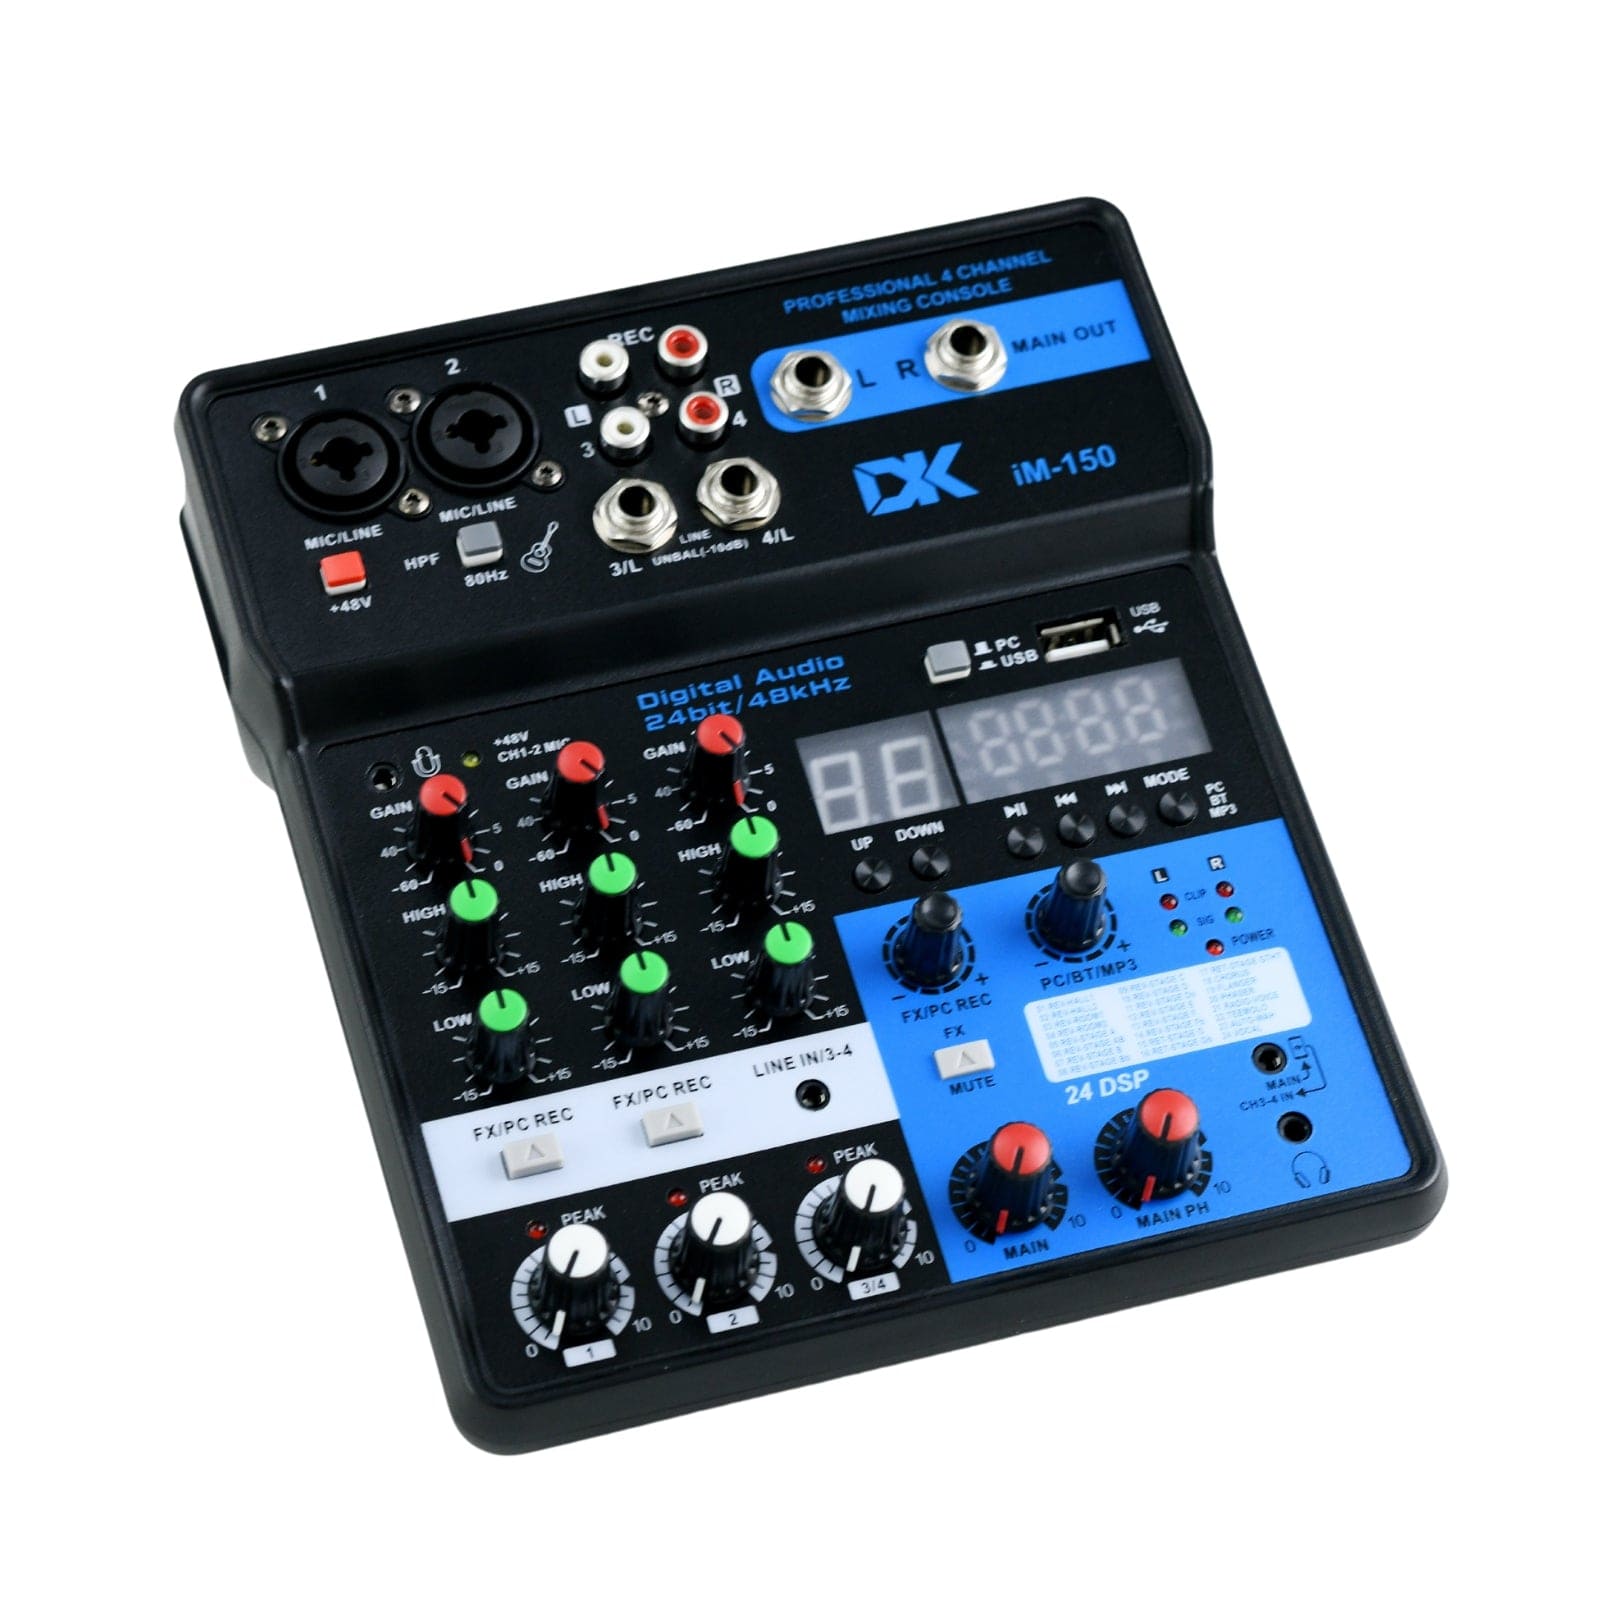 DK Audio iM-150 4 Channel USB Mixing Console Audio Interface